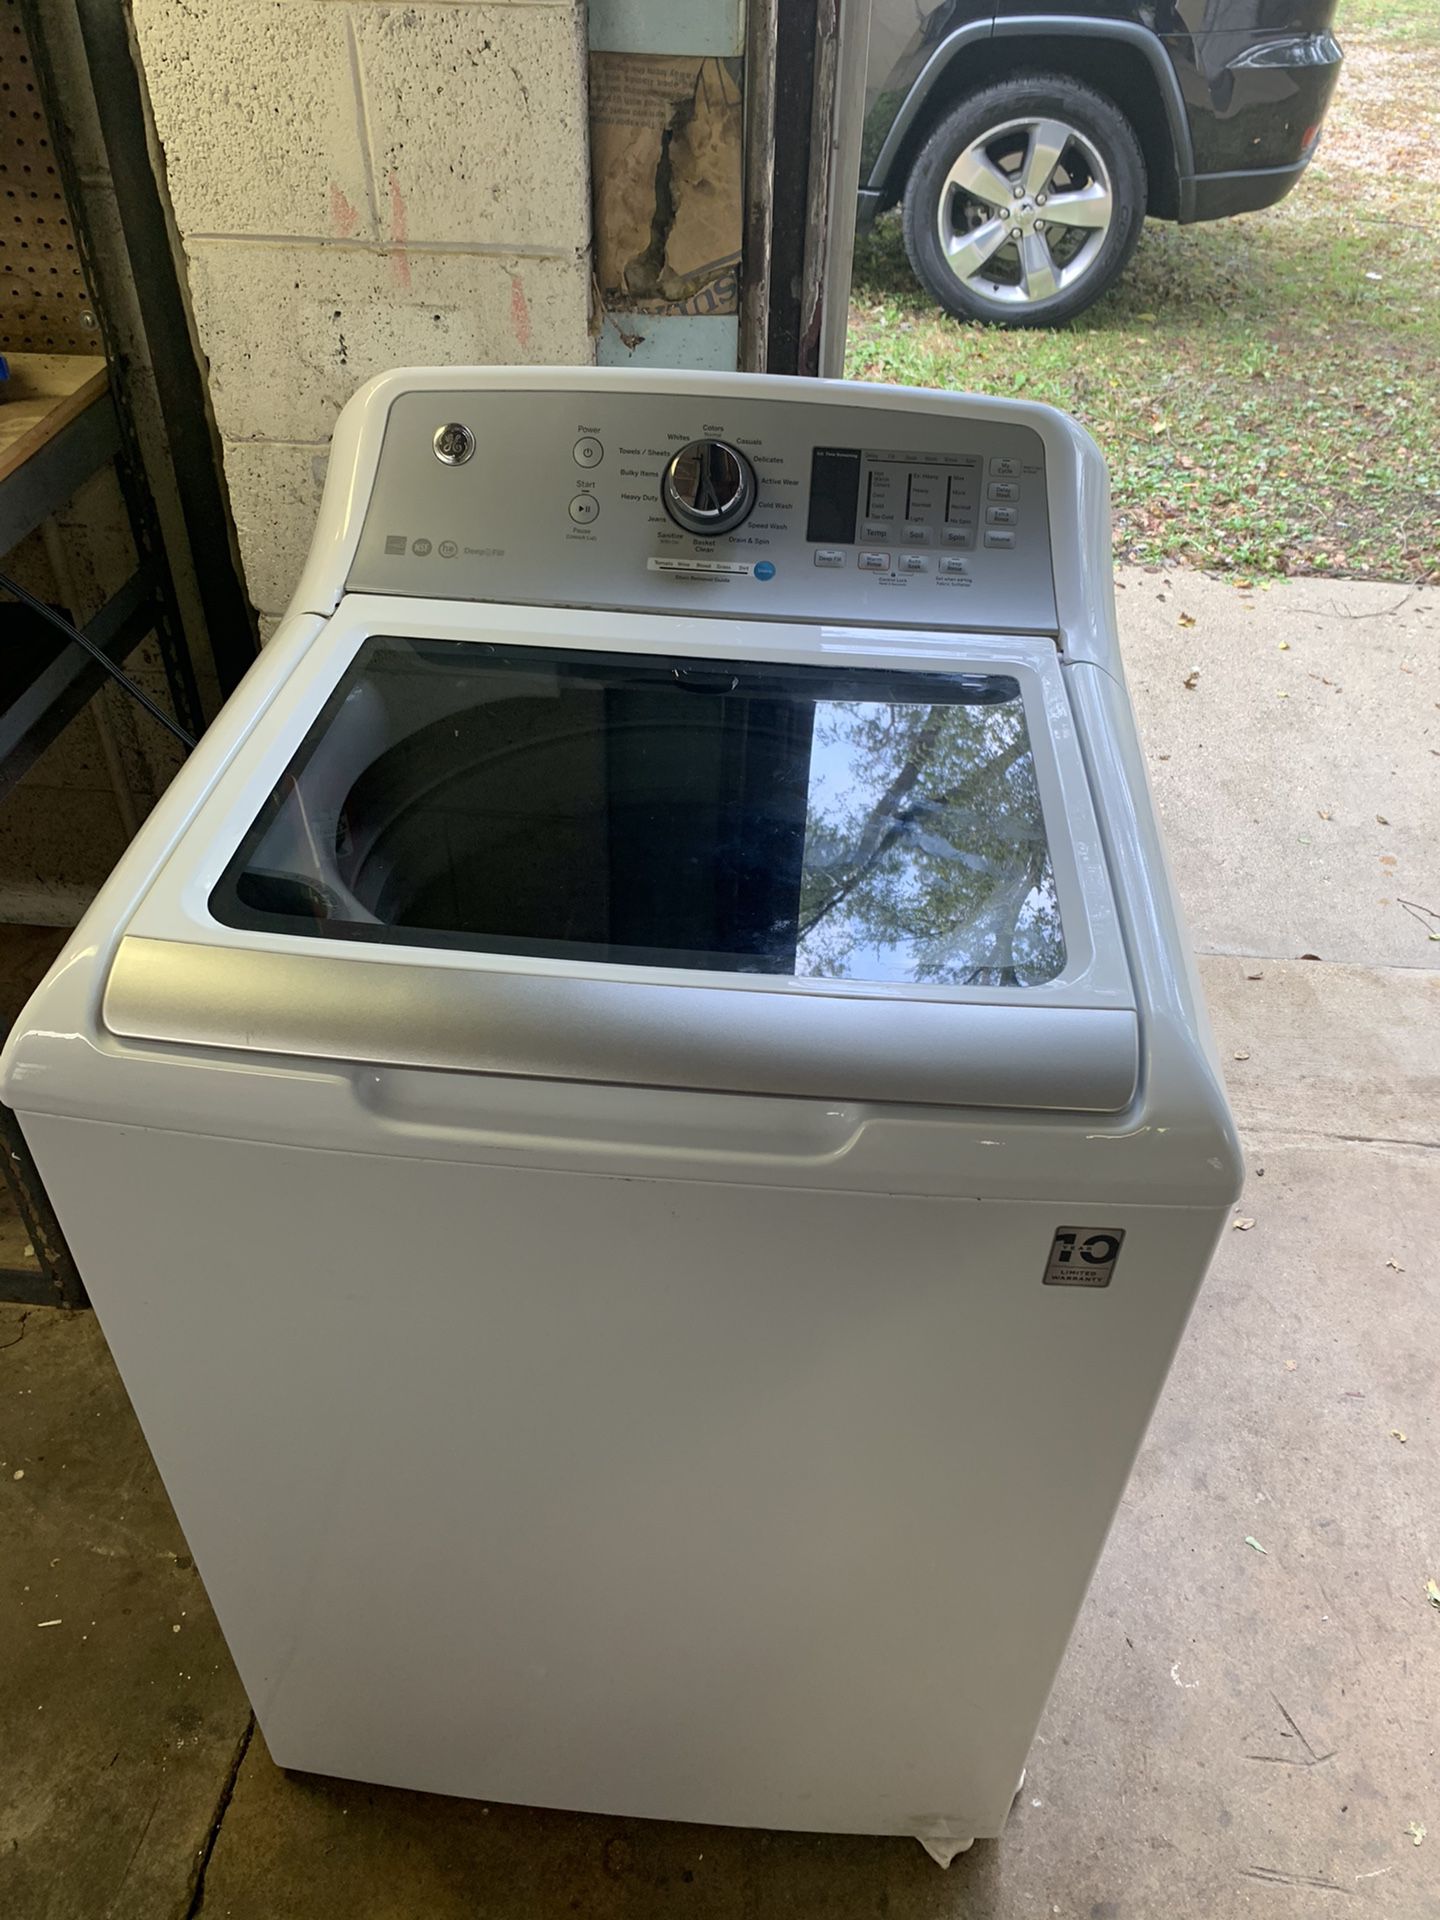 2017 GE washer